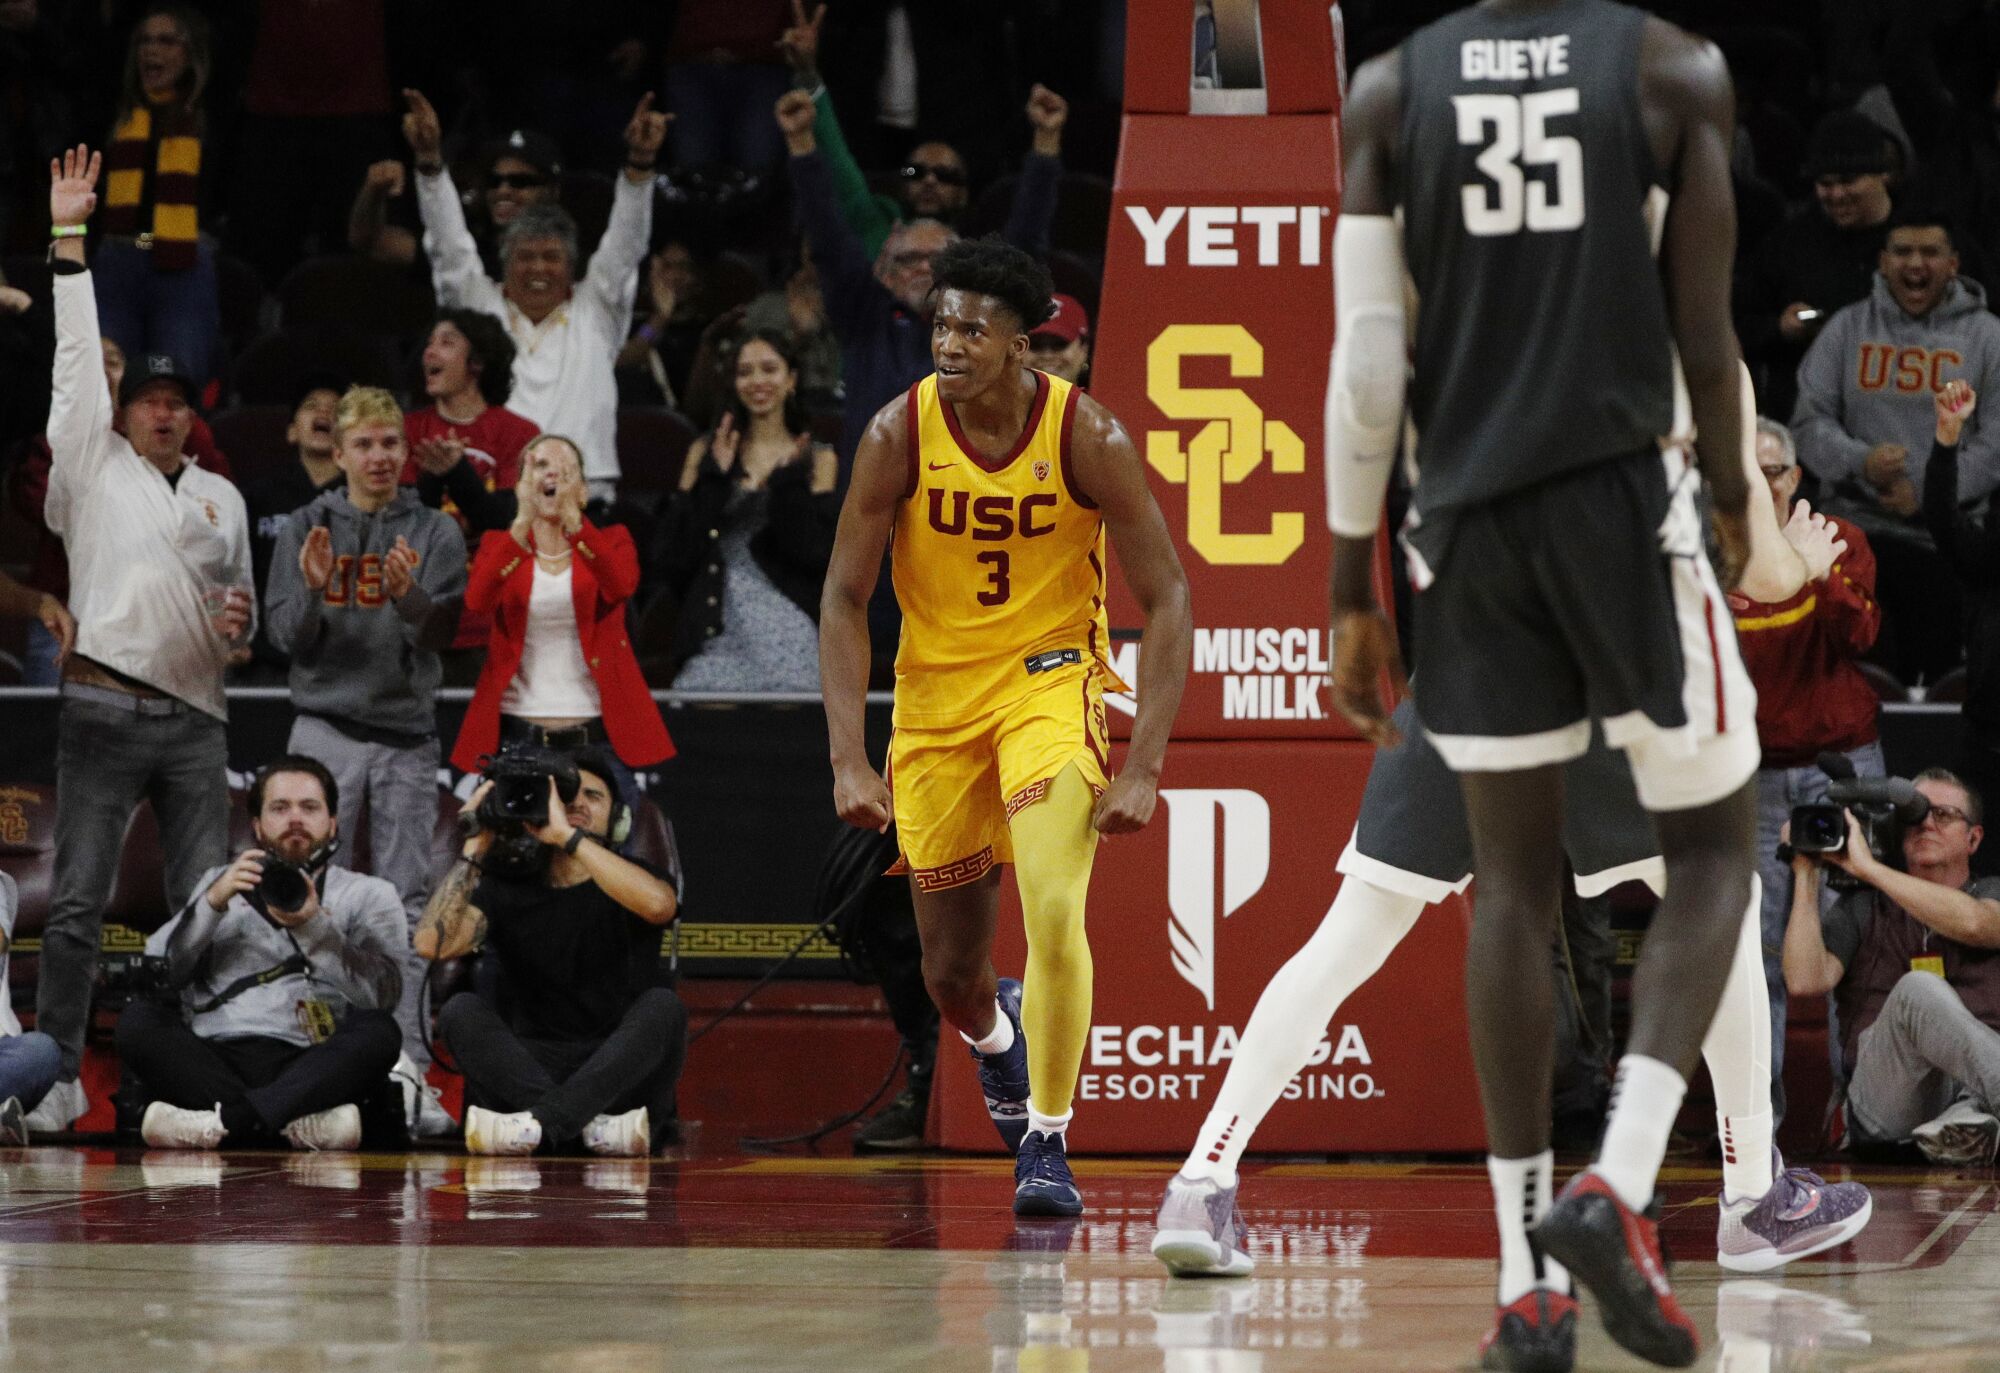 USC forward VIncent Iwuchukwu reacts with the cheering crowd after his slam dunk in the closing moments of the Trojans' win